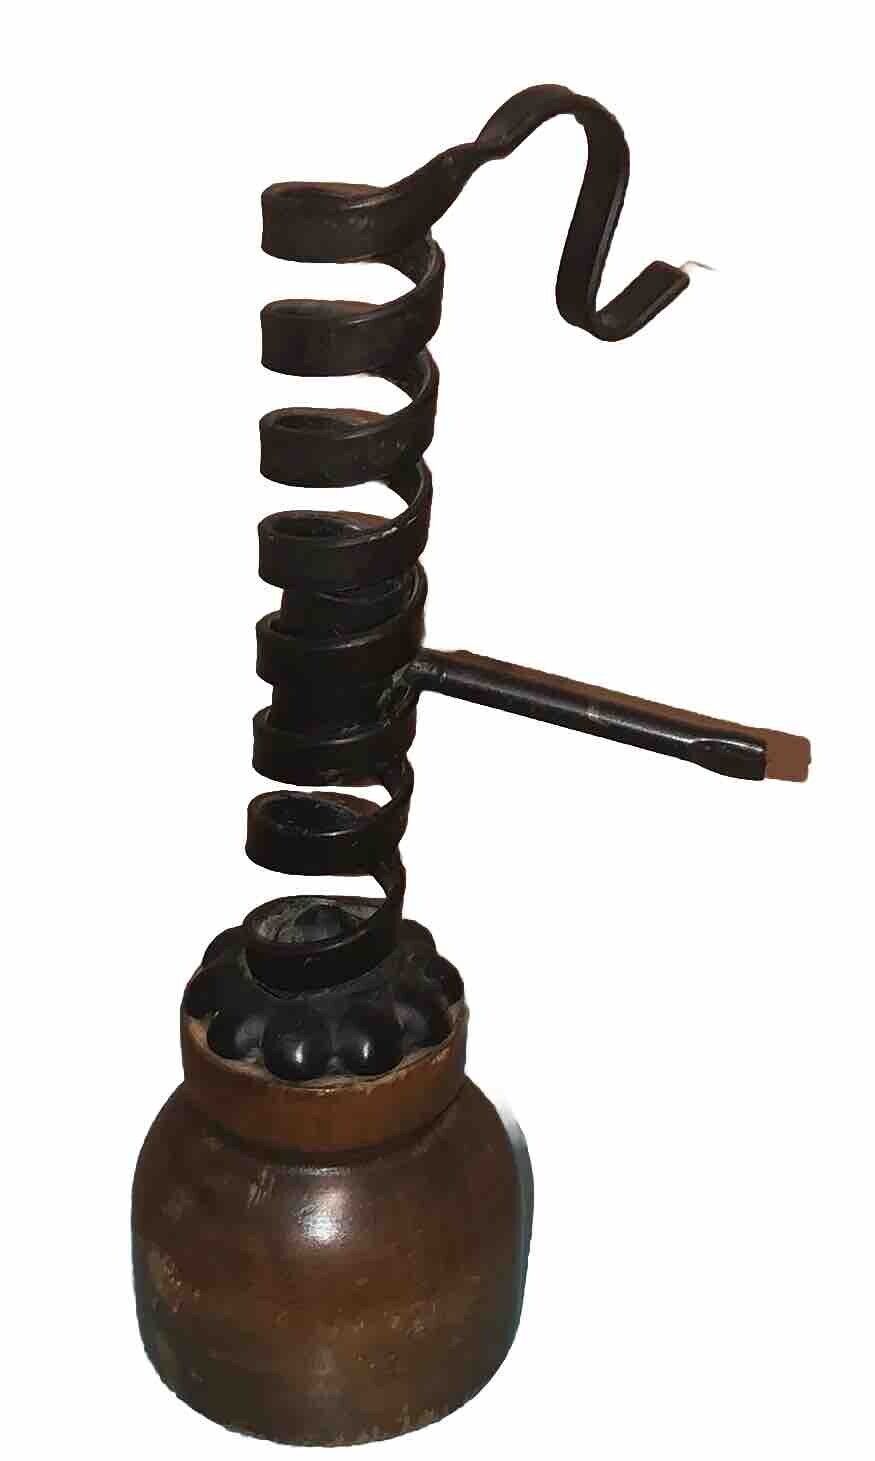 Courting Candle Antique Cast Iron Adjustable Spiral Candlestick Primitive